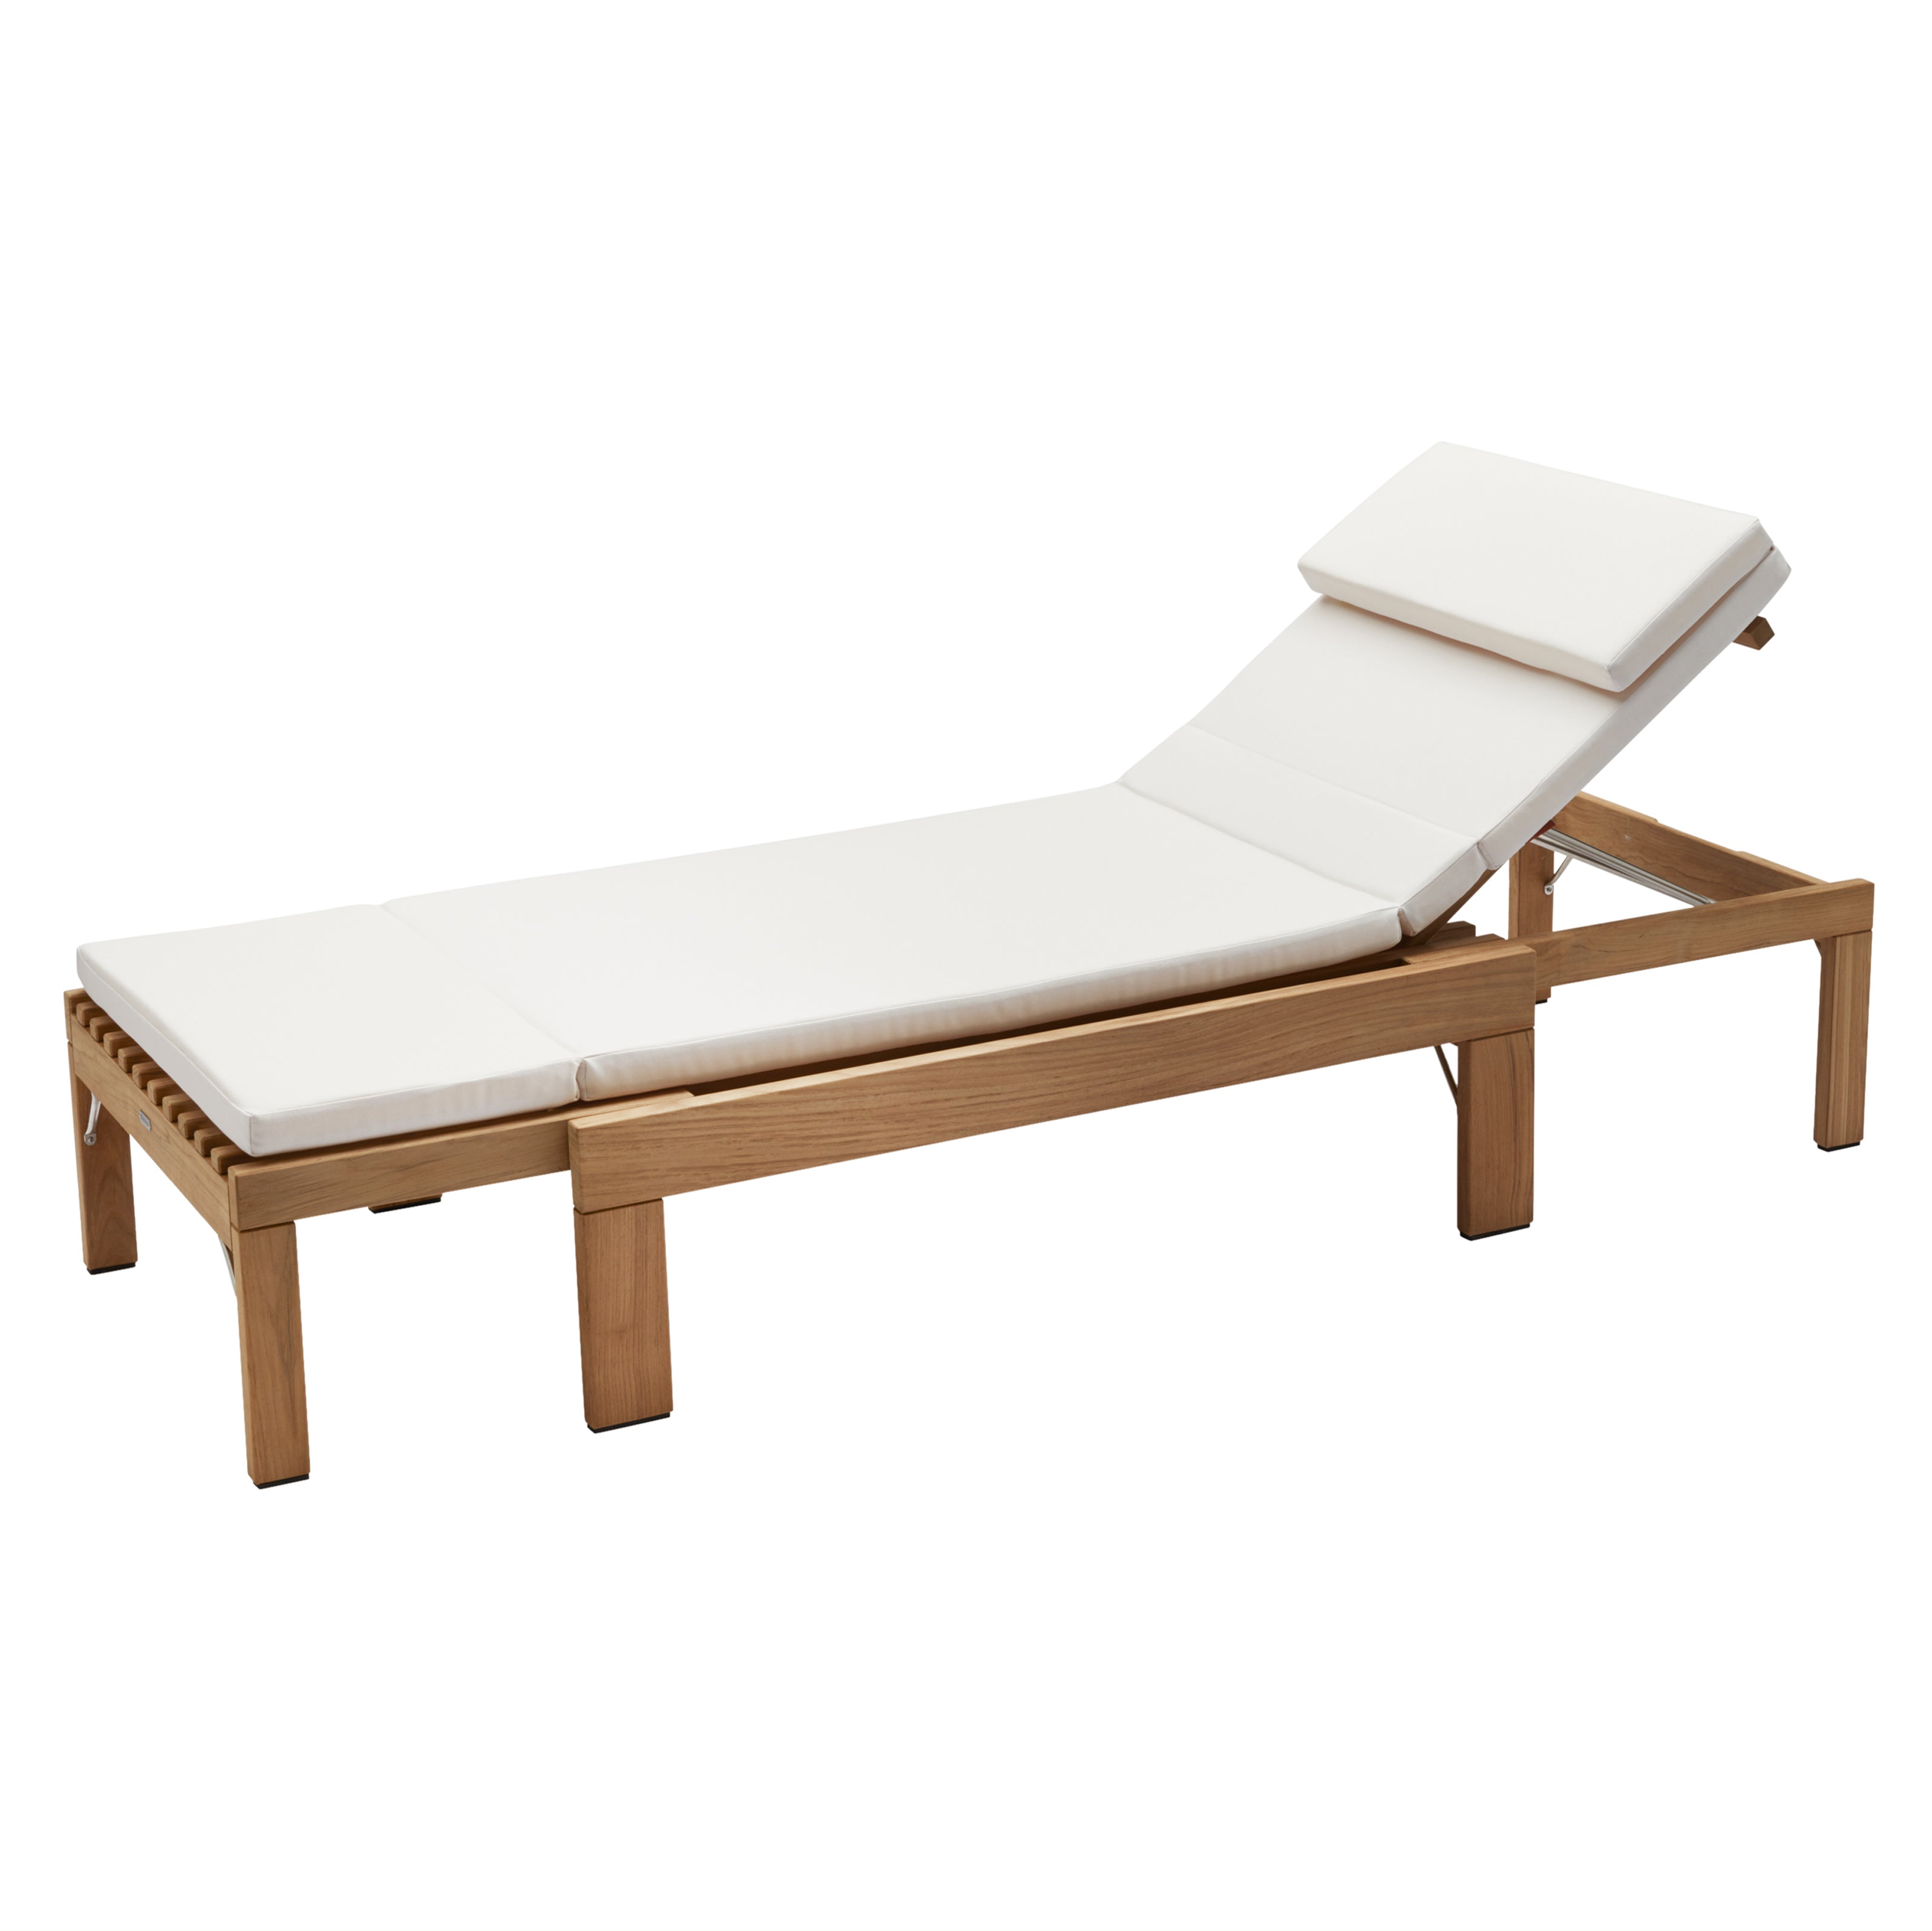 Riviera Sunbed: With White Cushion